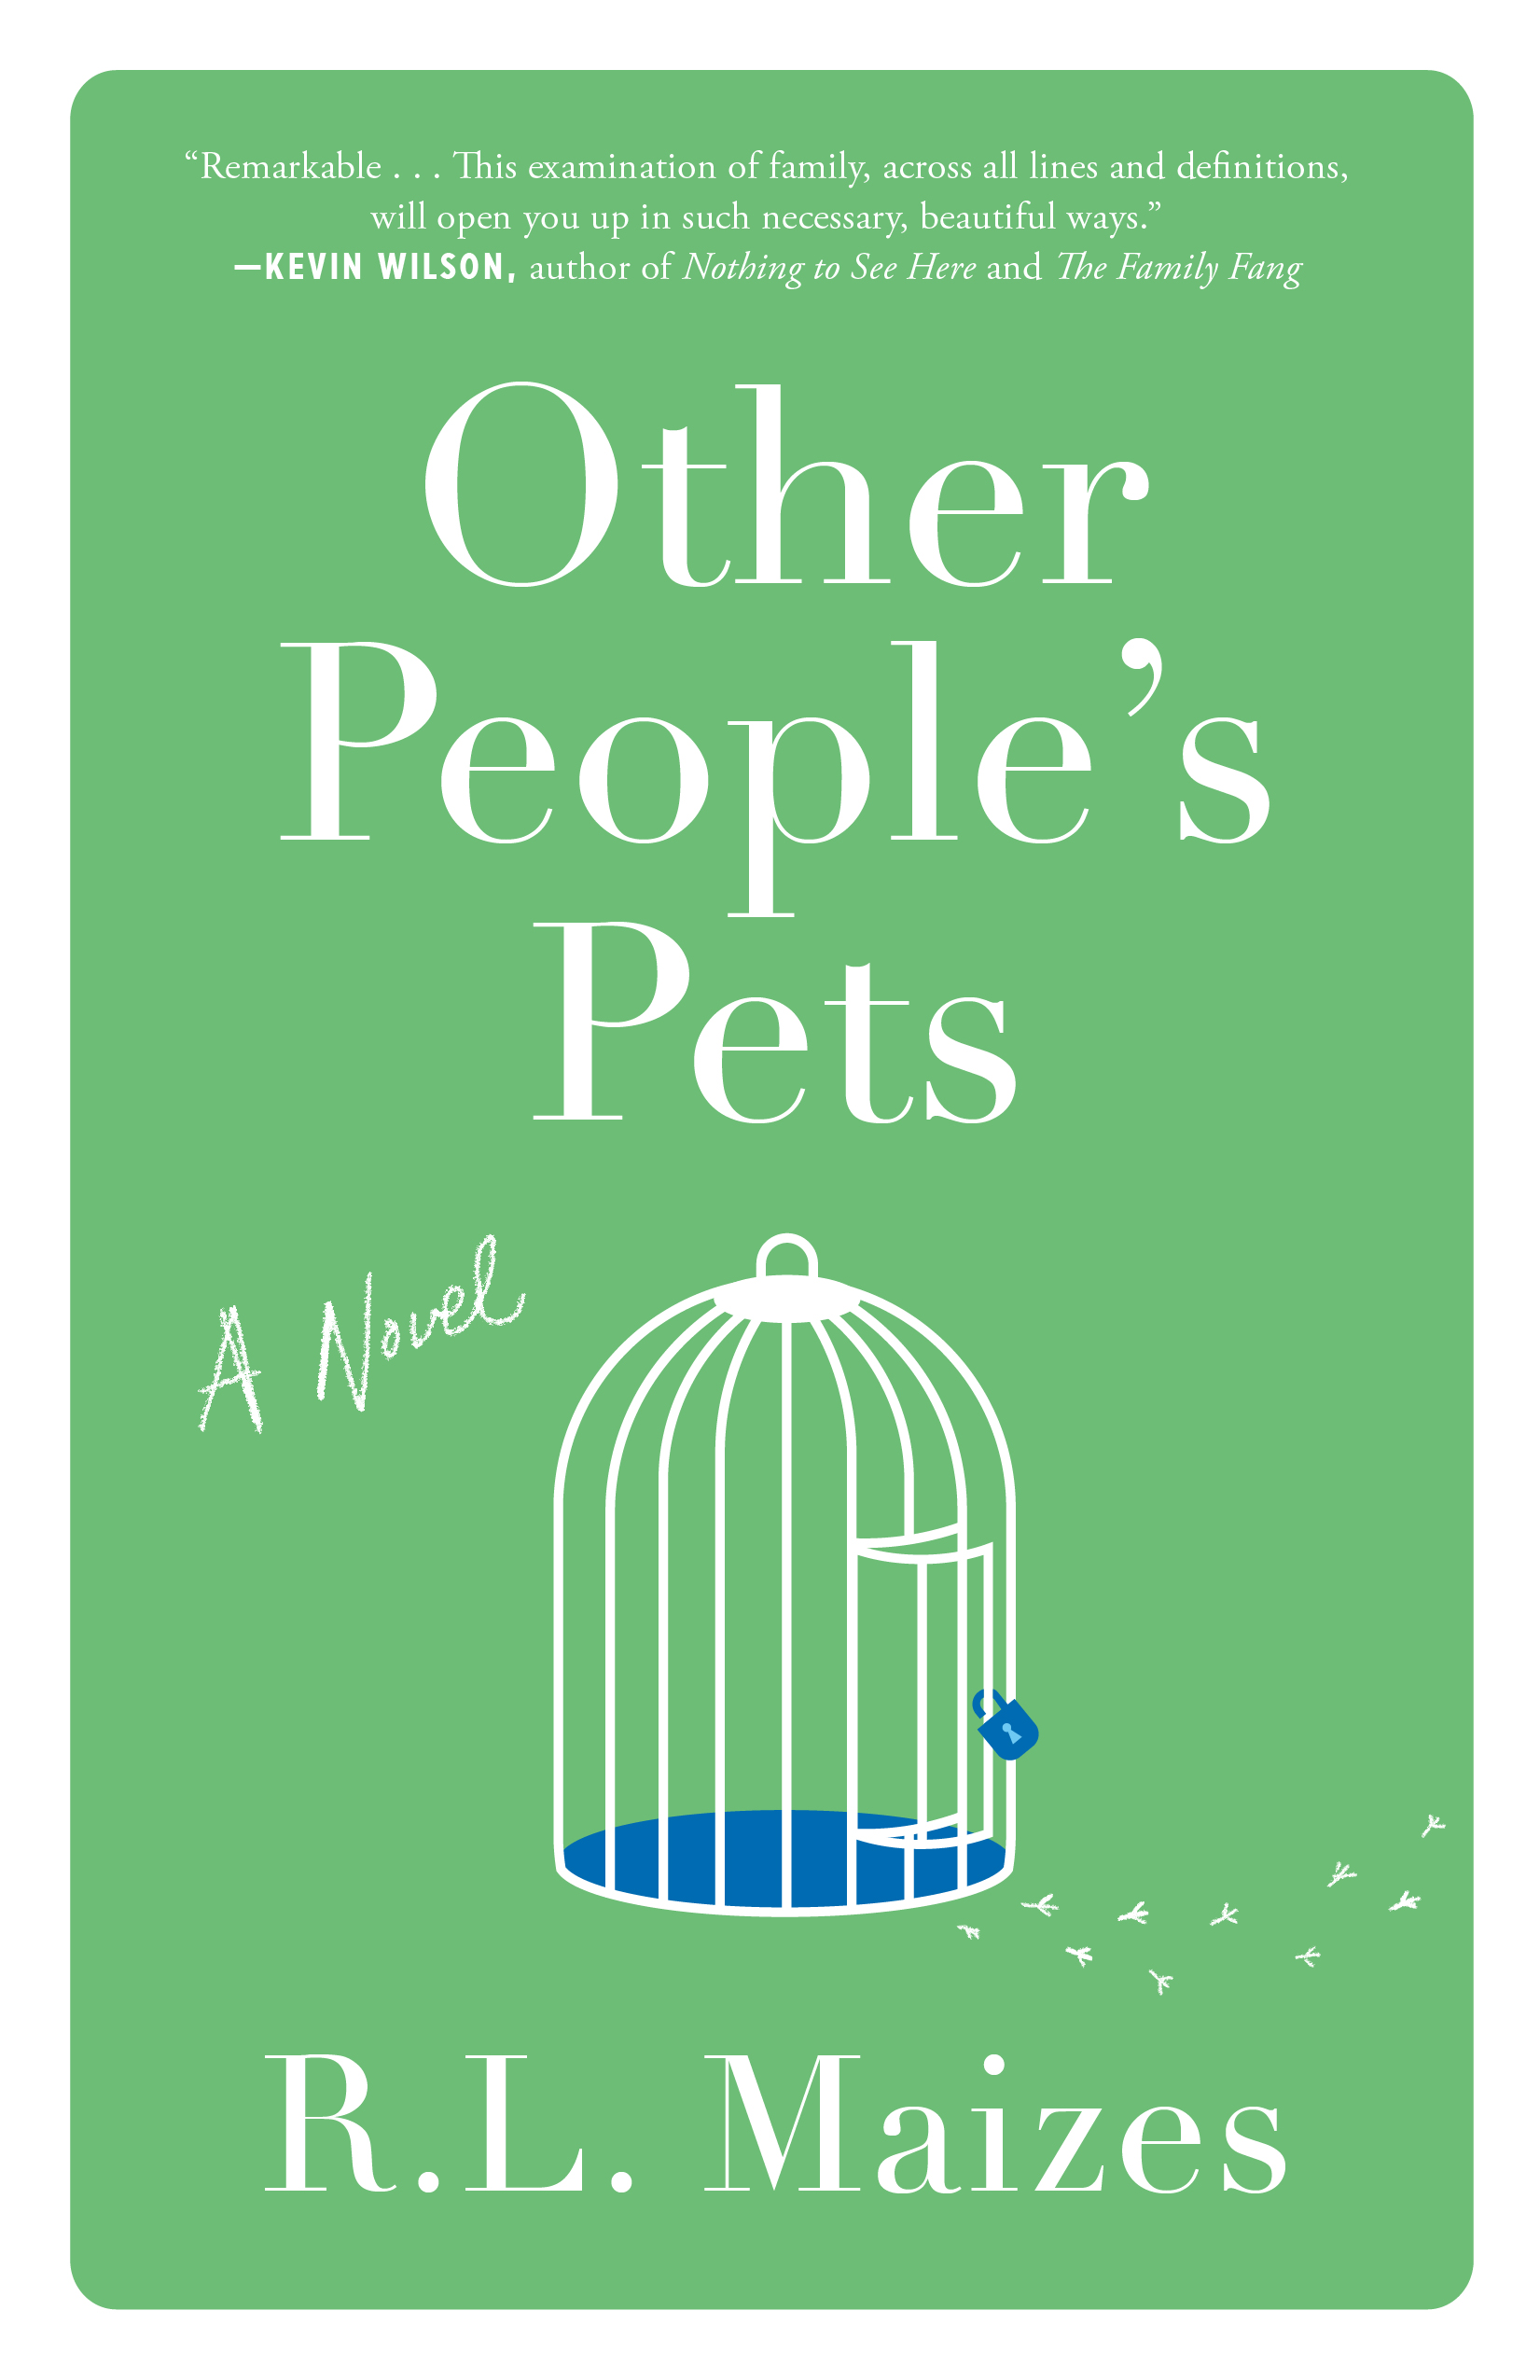 A book cover for "other people's pets" by r.l. maizes featuring a minimalist design with a birdcage graphic and a positive quote from author kevin wilson.